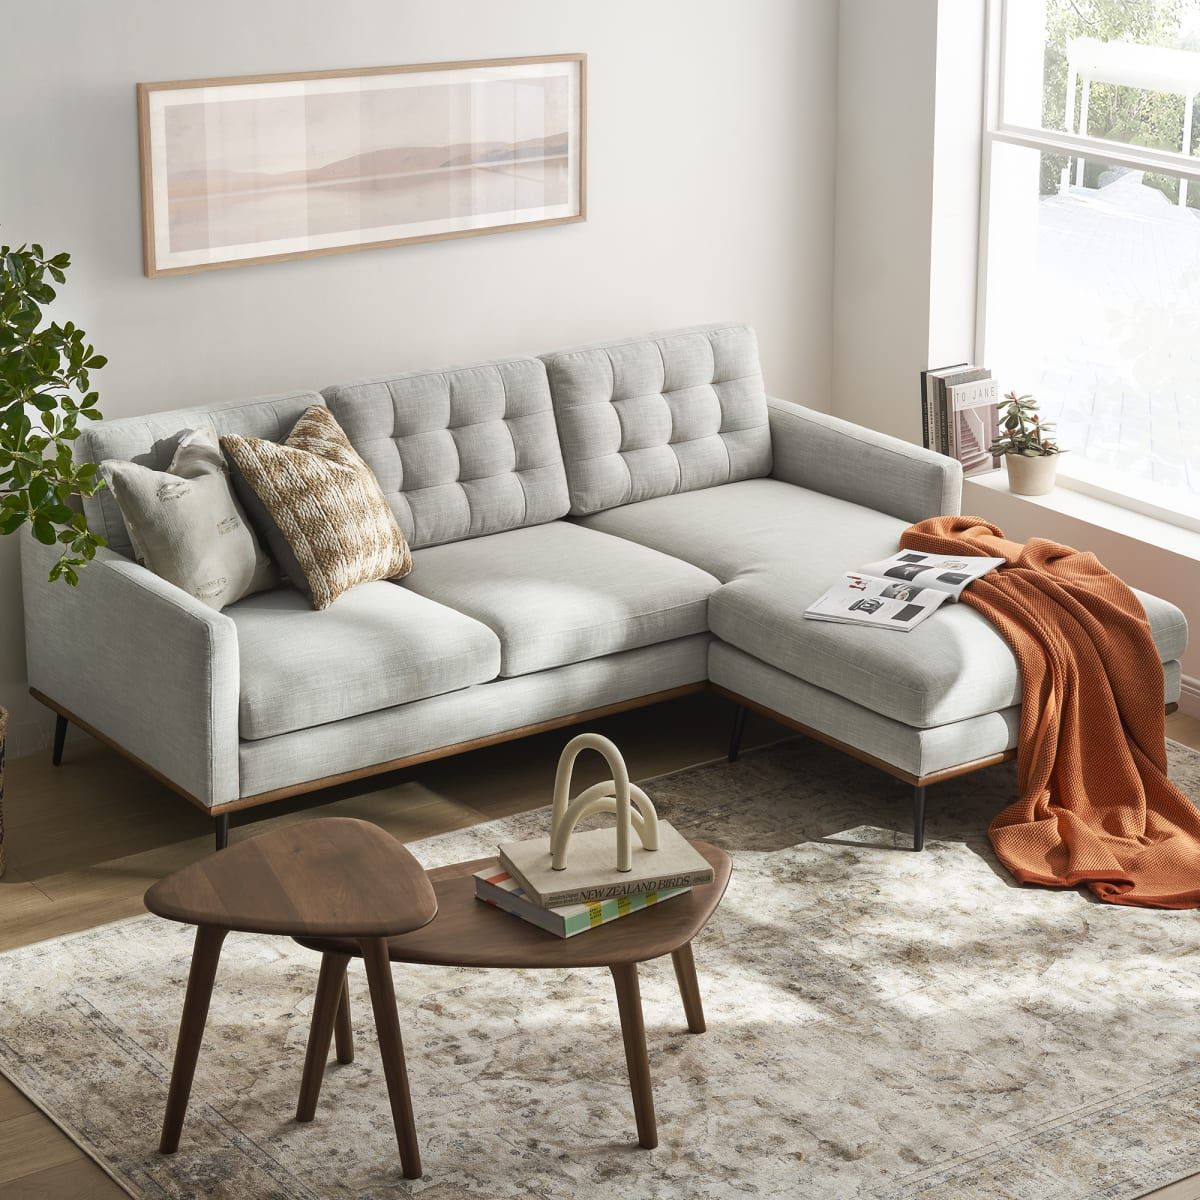 Isaac Reversible Sectional Sofa | Castlery United States With Regard To Reversible Sectional Sofas (Gallery 17 of 20)